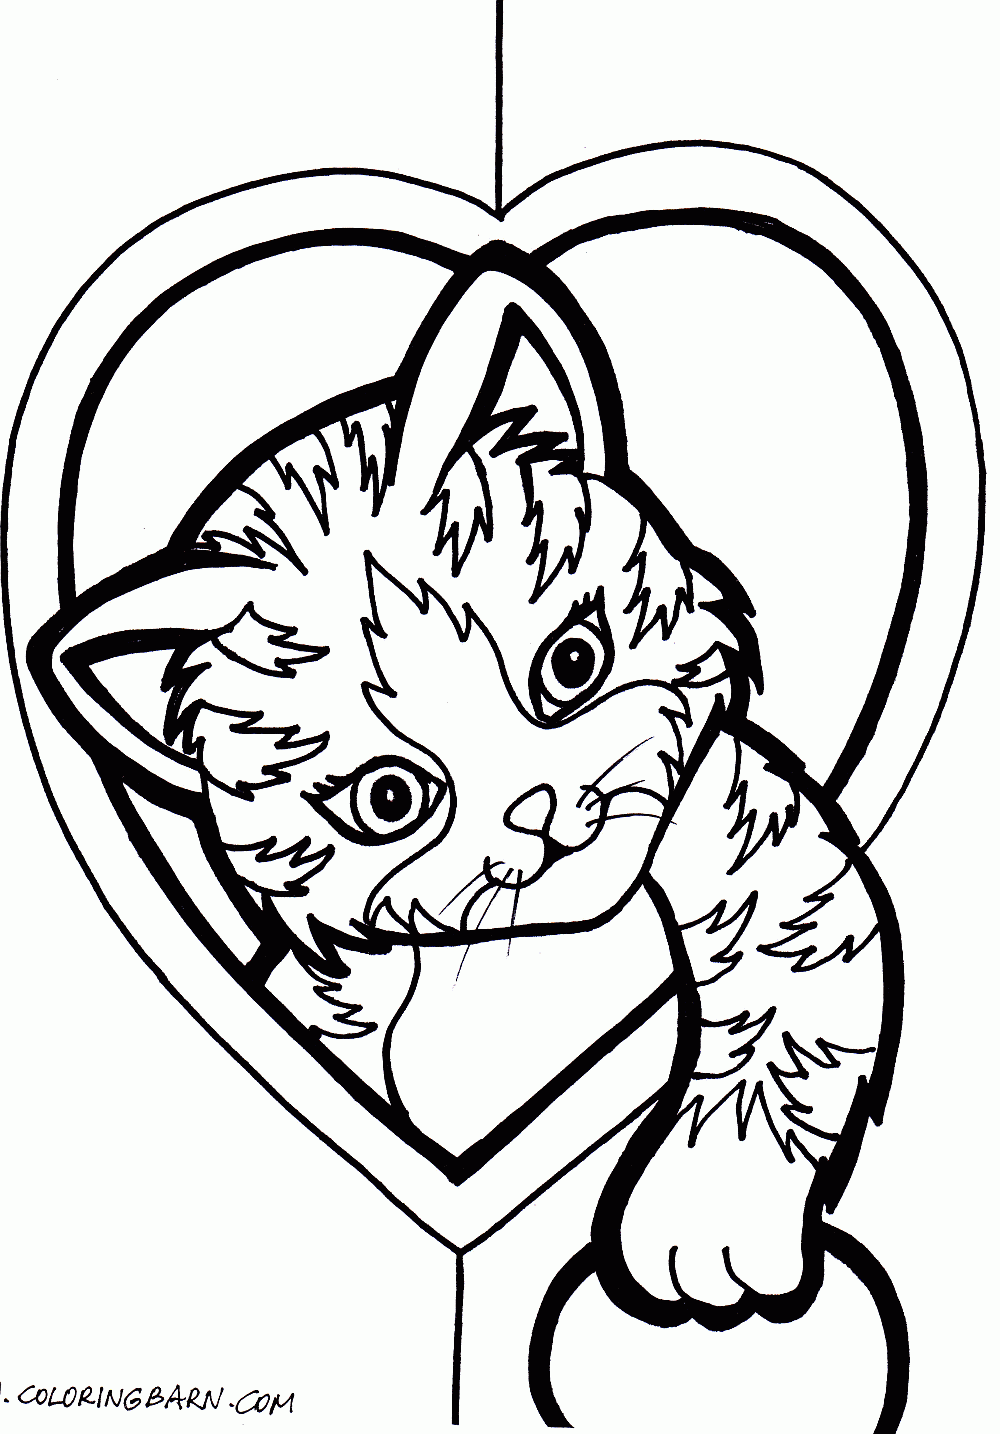 Printable Heart Coloring Page Free Printable Pertaining To Heart Coloring Pages To